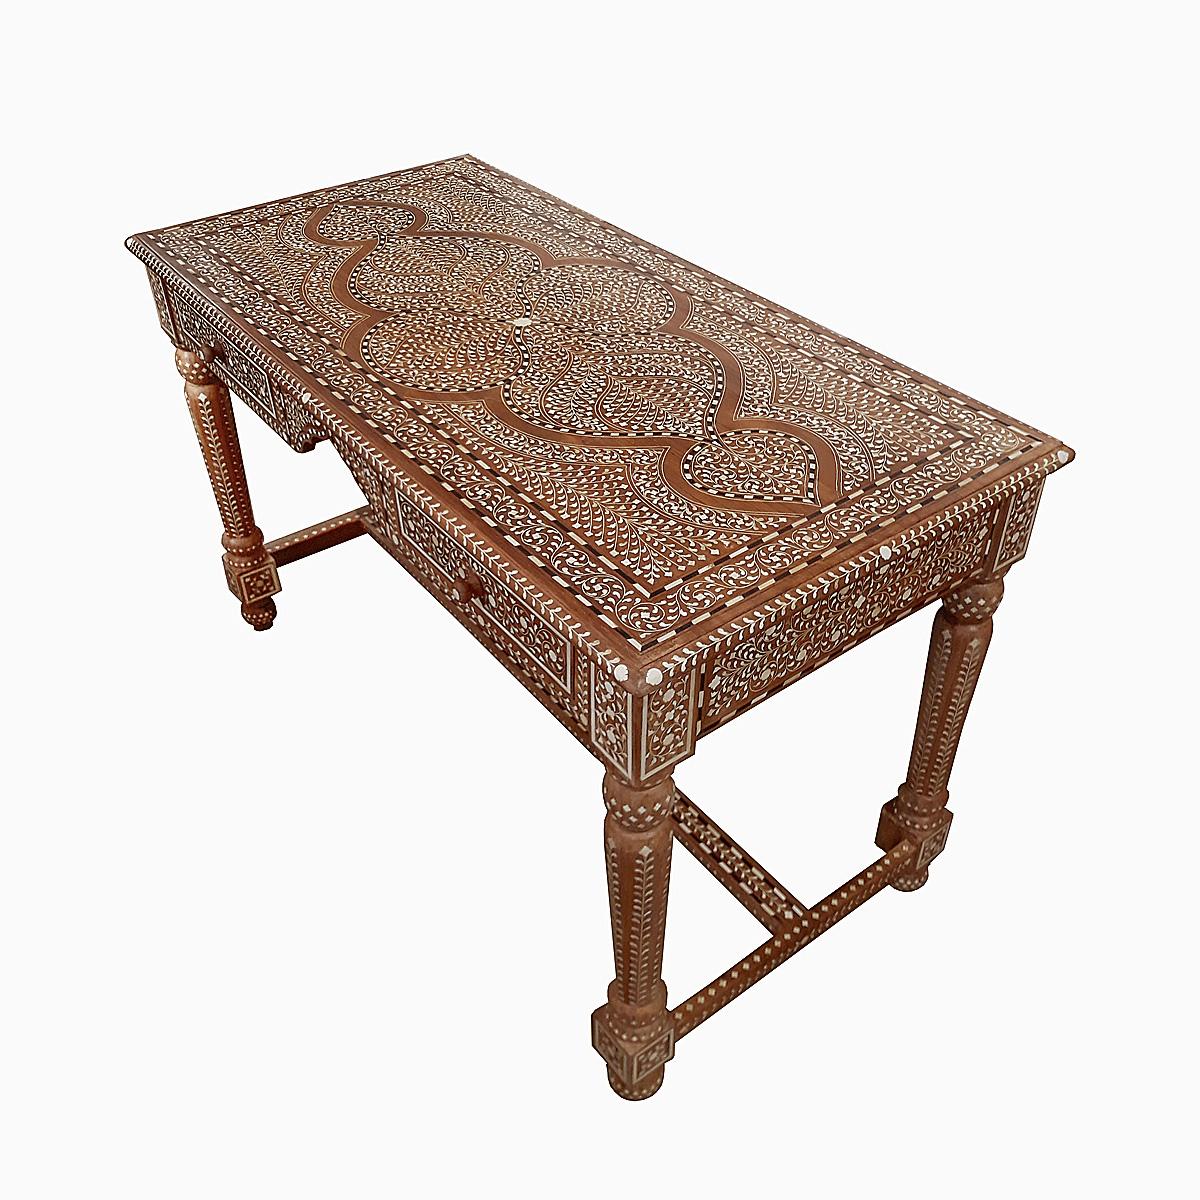 Hand-Crafted Bone-Inlaid Teak Writing Desk from India